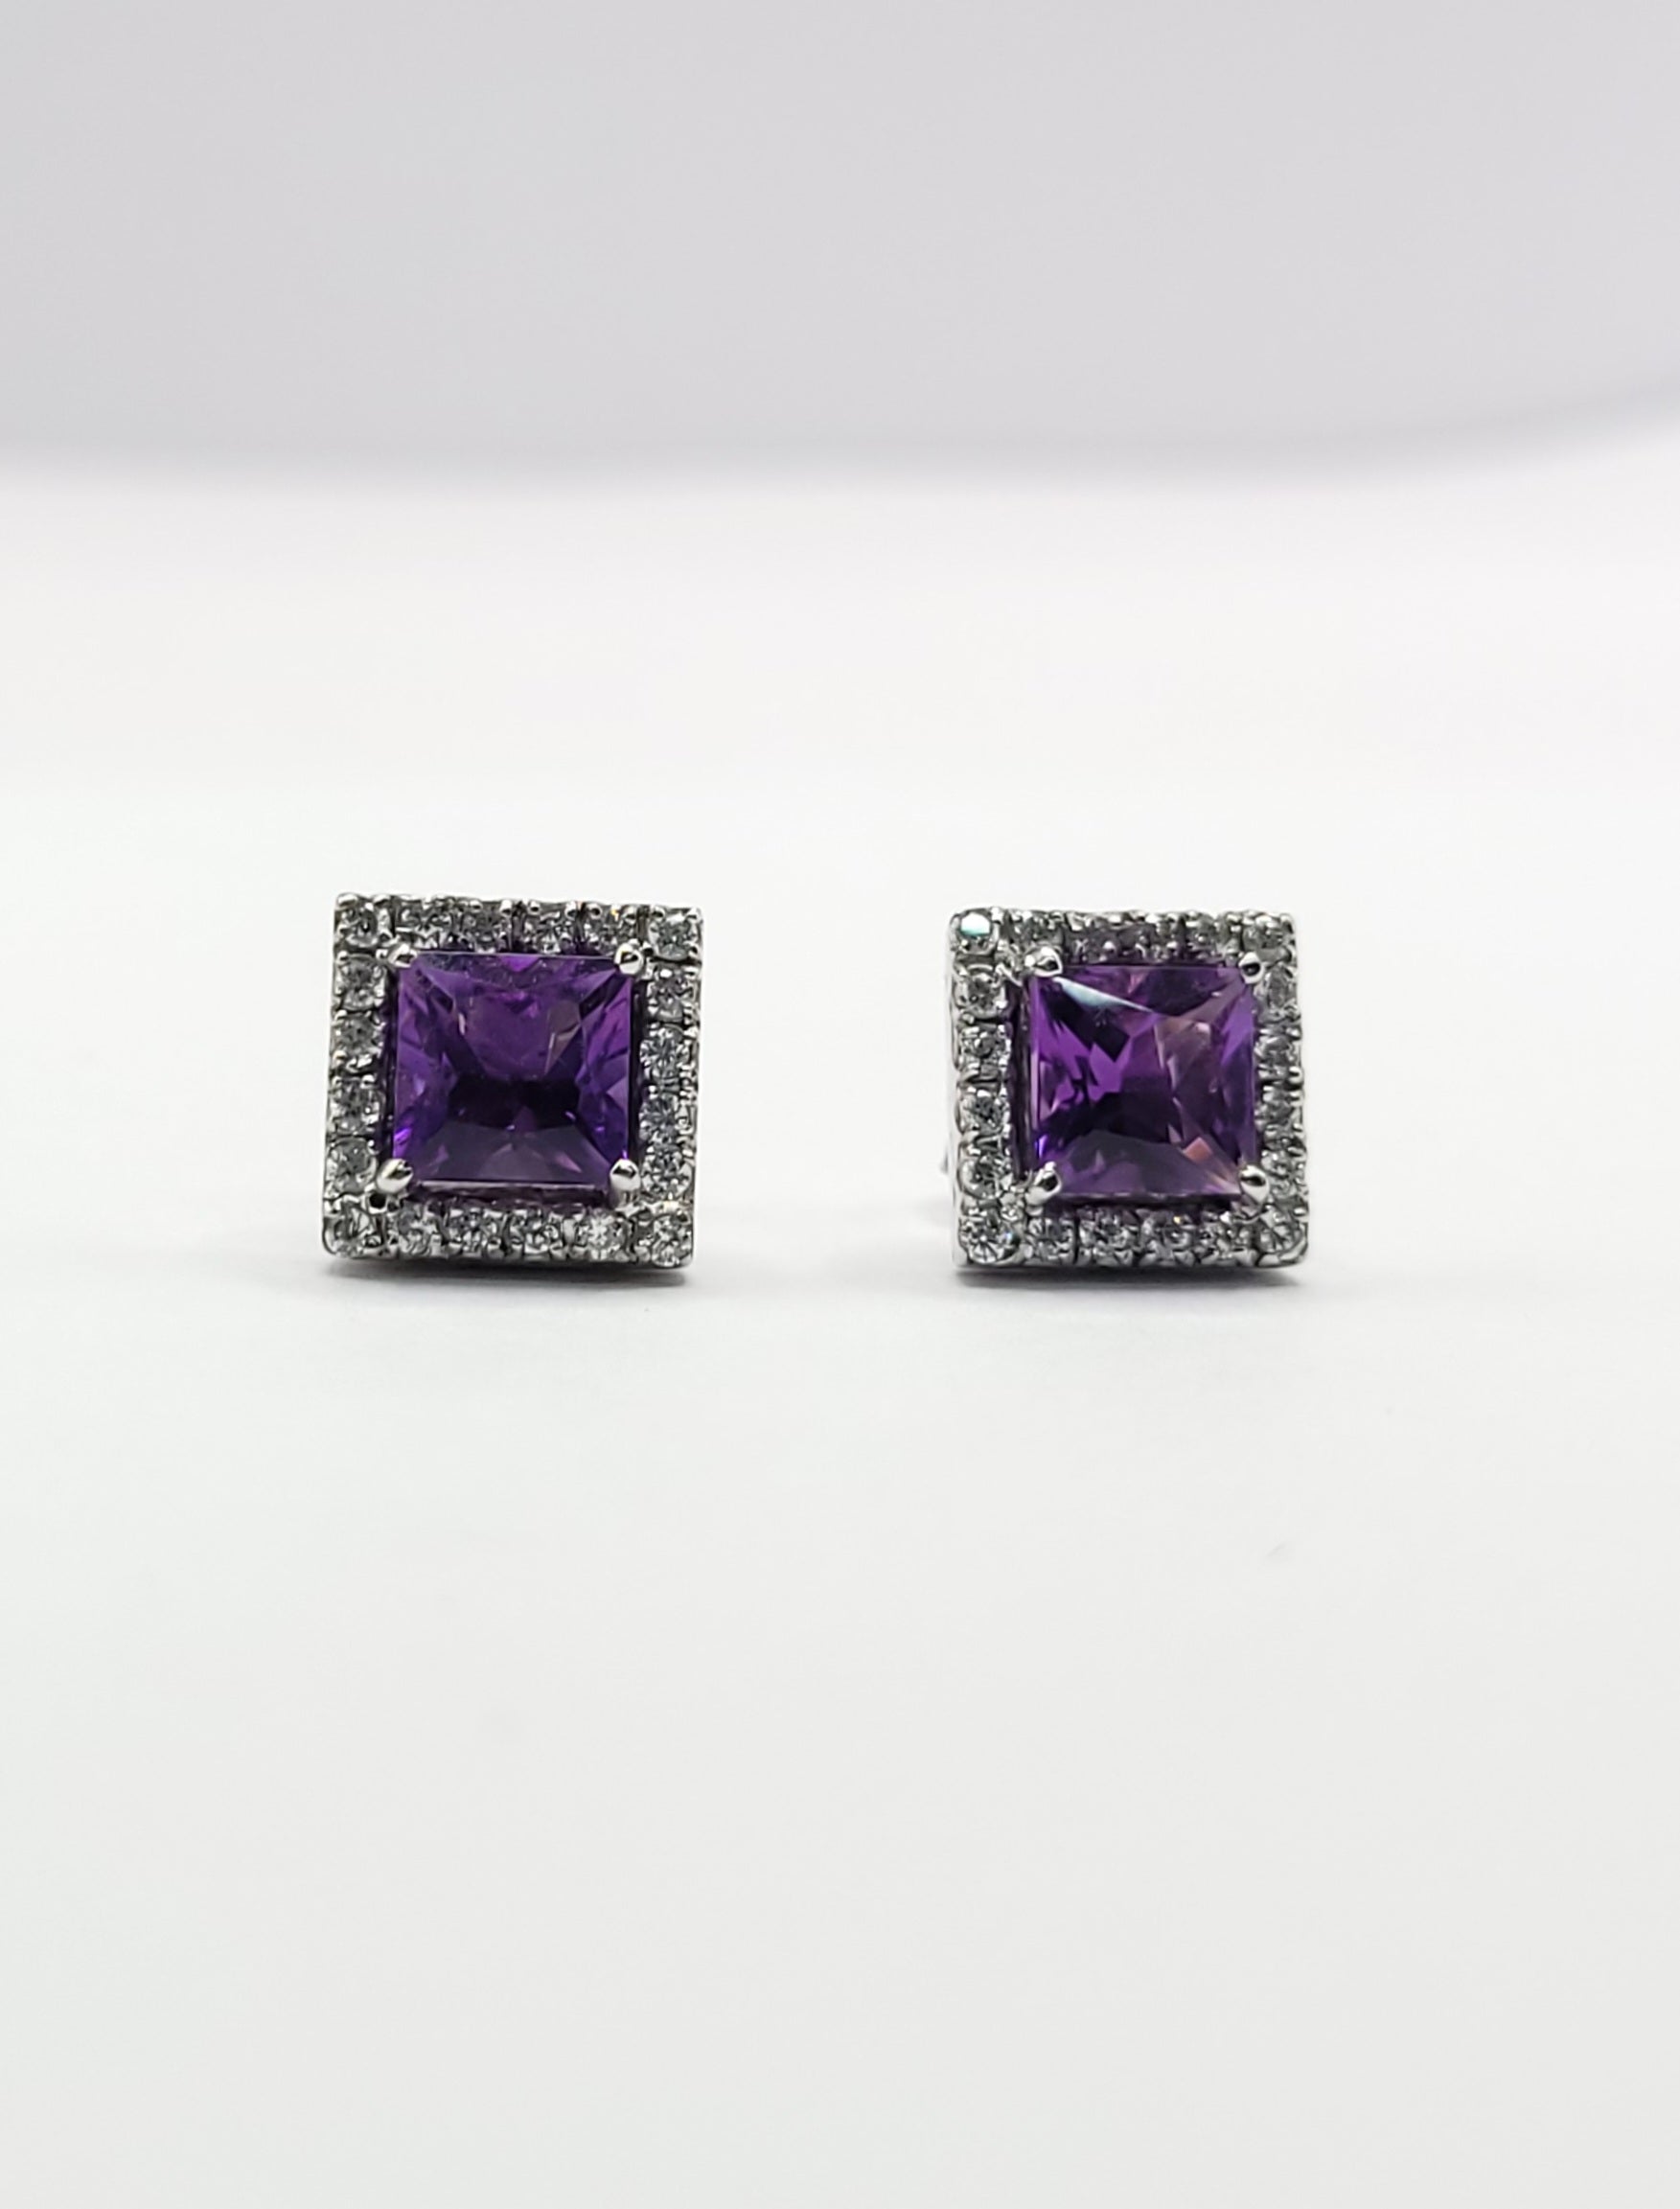 Amethyst stone on sterling silver princess cut style